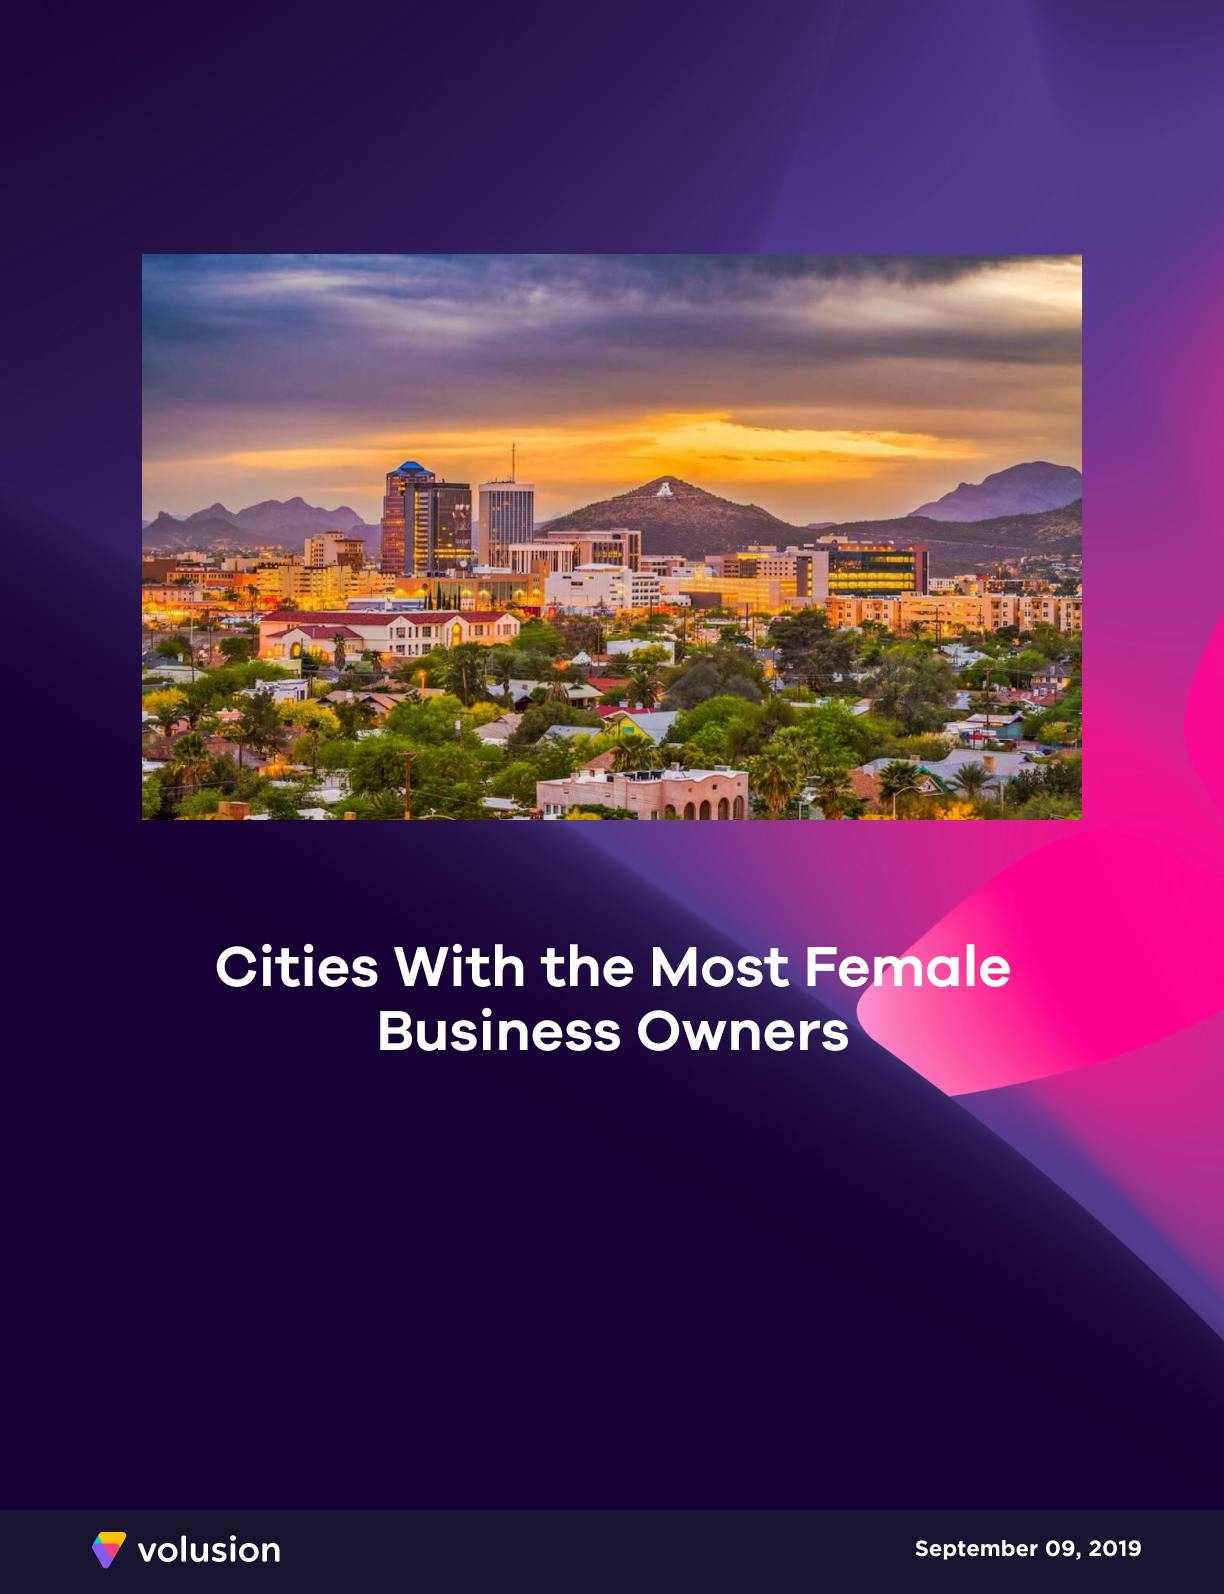 Cities with the Most Female Business Owners